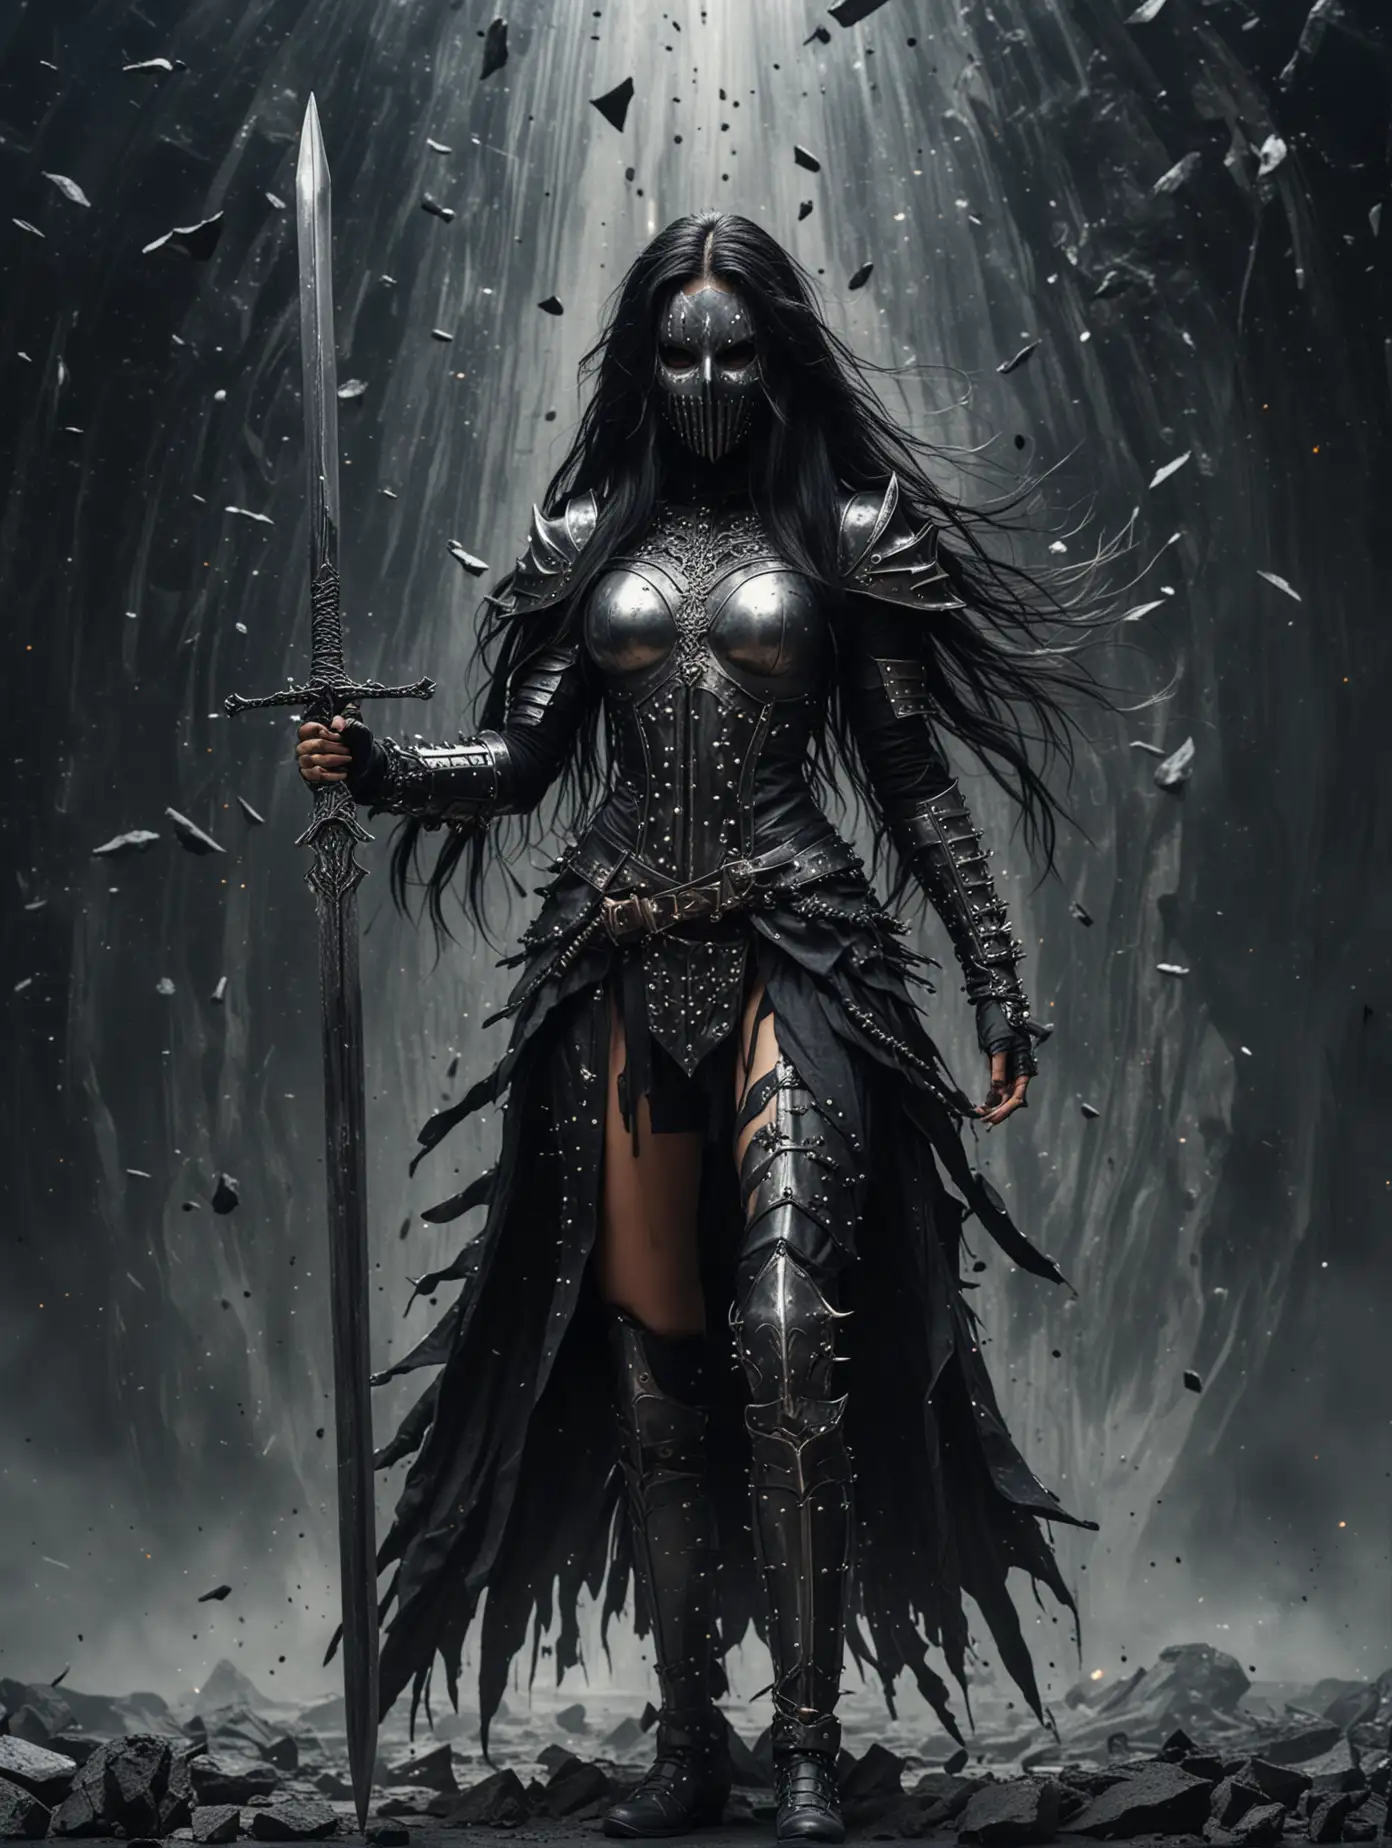 Intimidating-Female-Warrior-in-Silver-Armor-Wielding-a-Carved-Sword-Against-a-Dark-Void